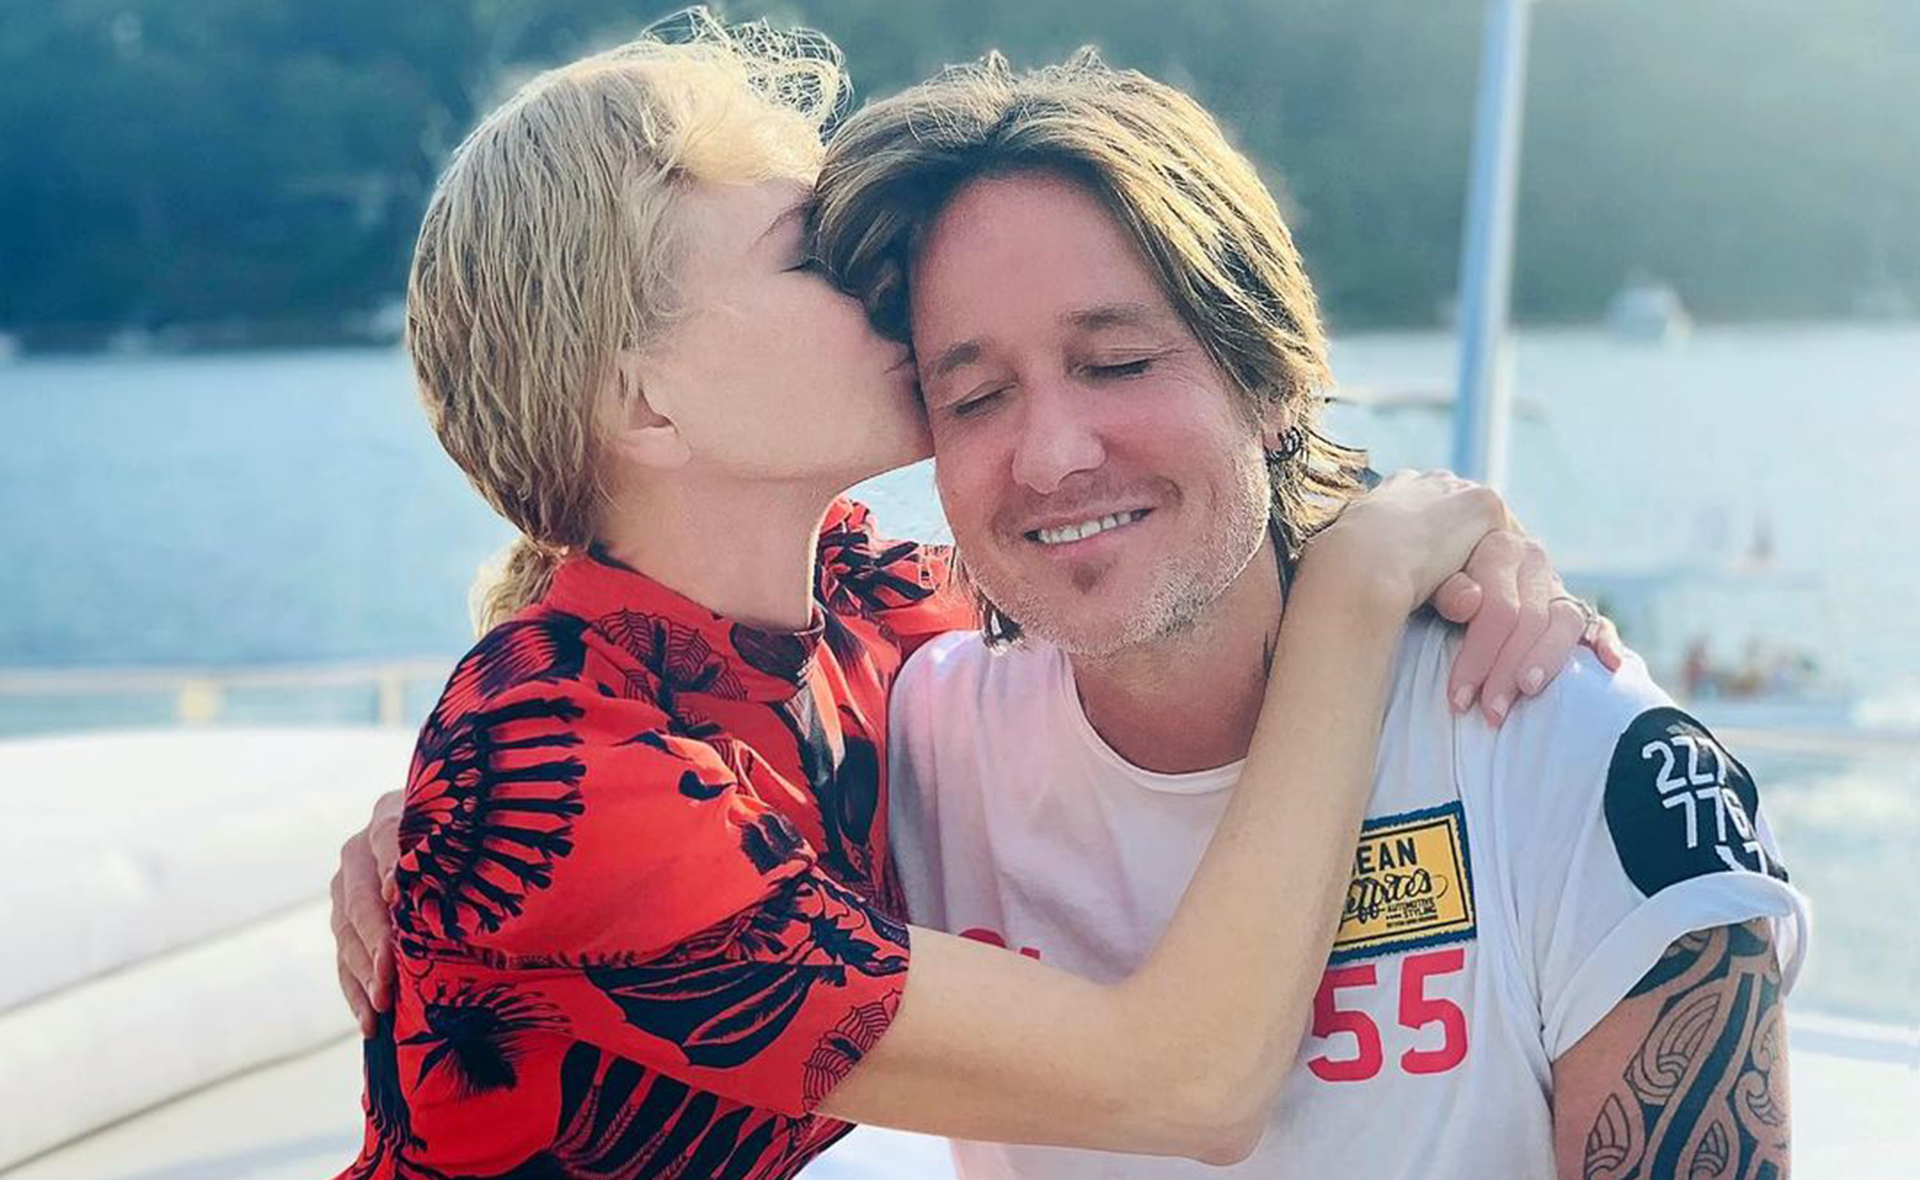 Nicole Kidman’s loved-up post in honour of Keith Urban’s birthday has us totally smitten